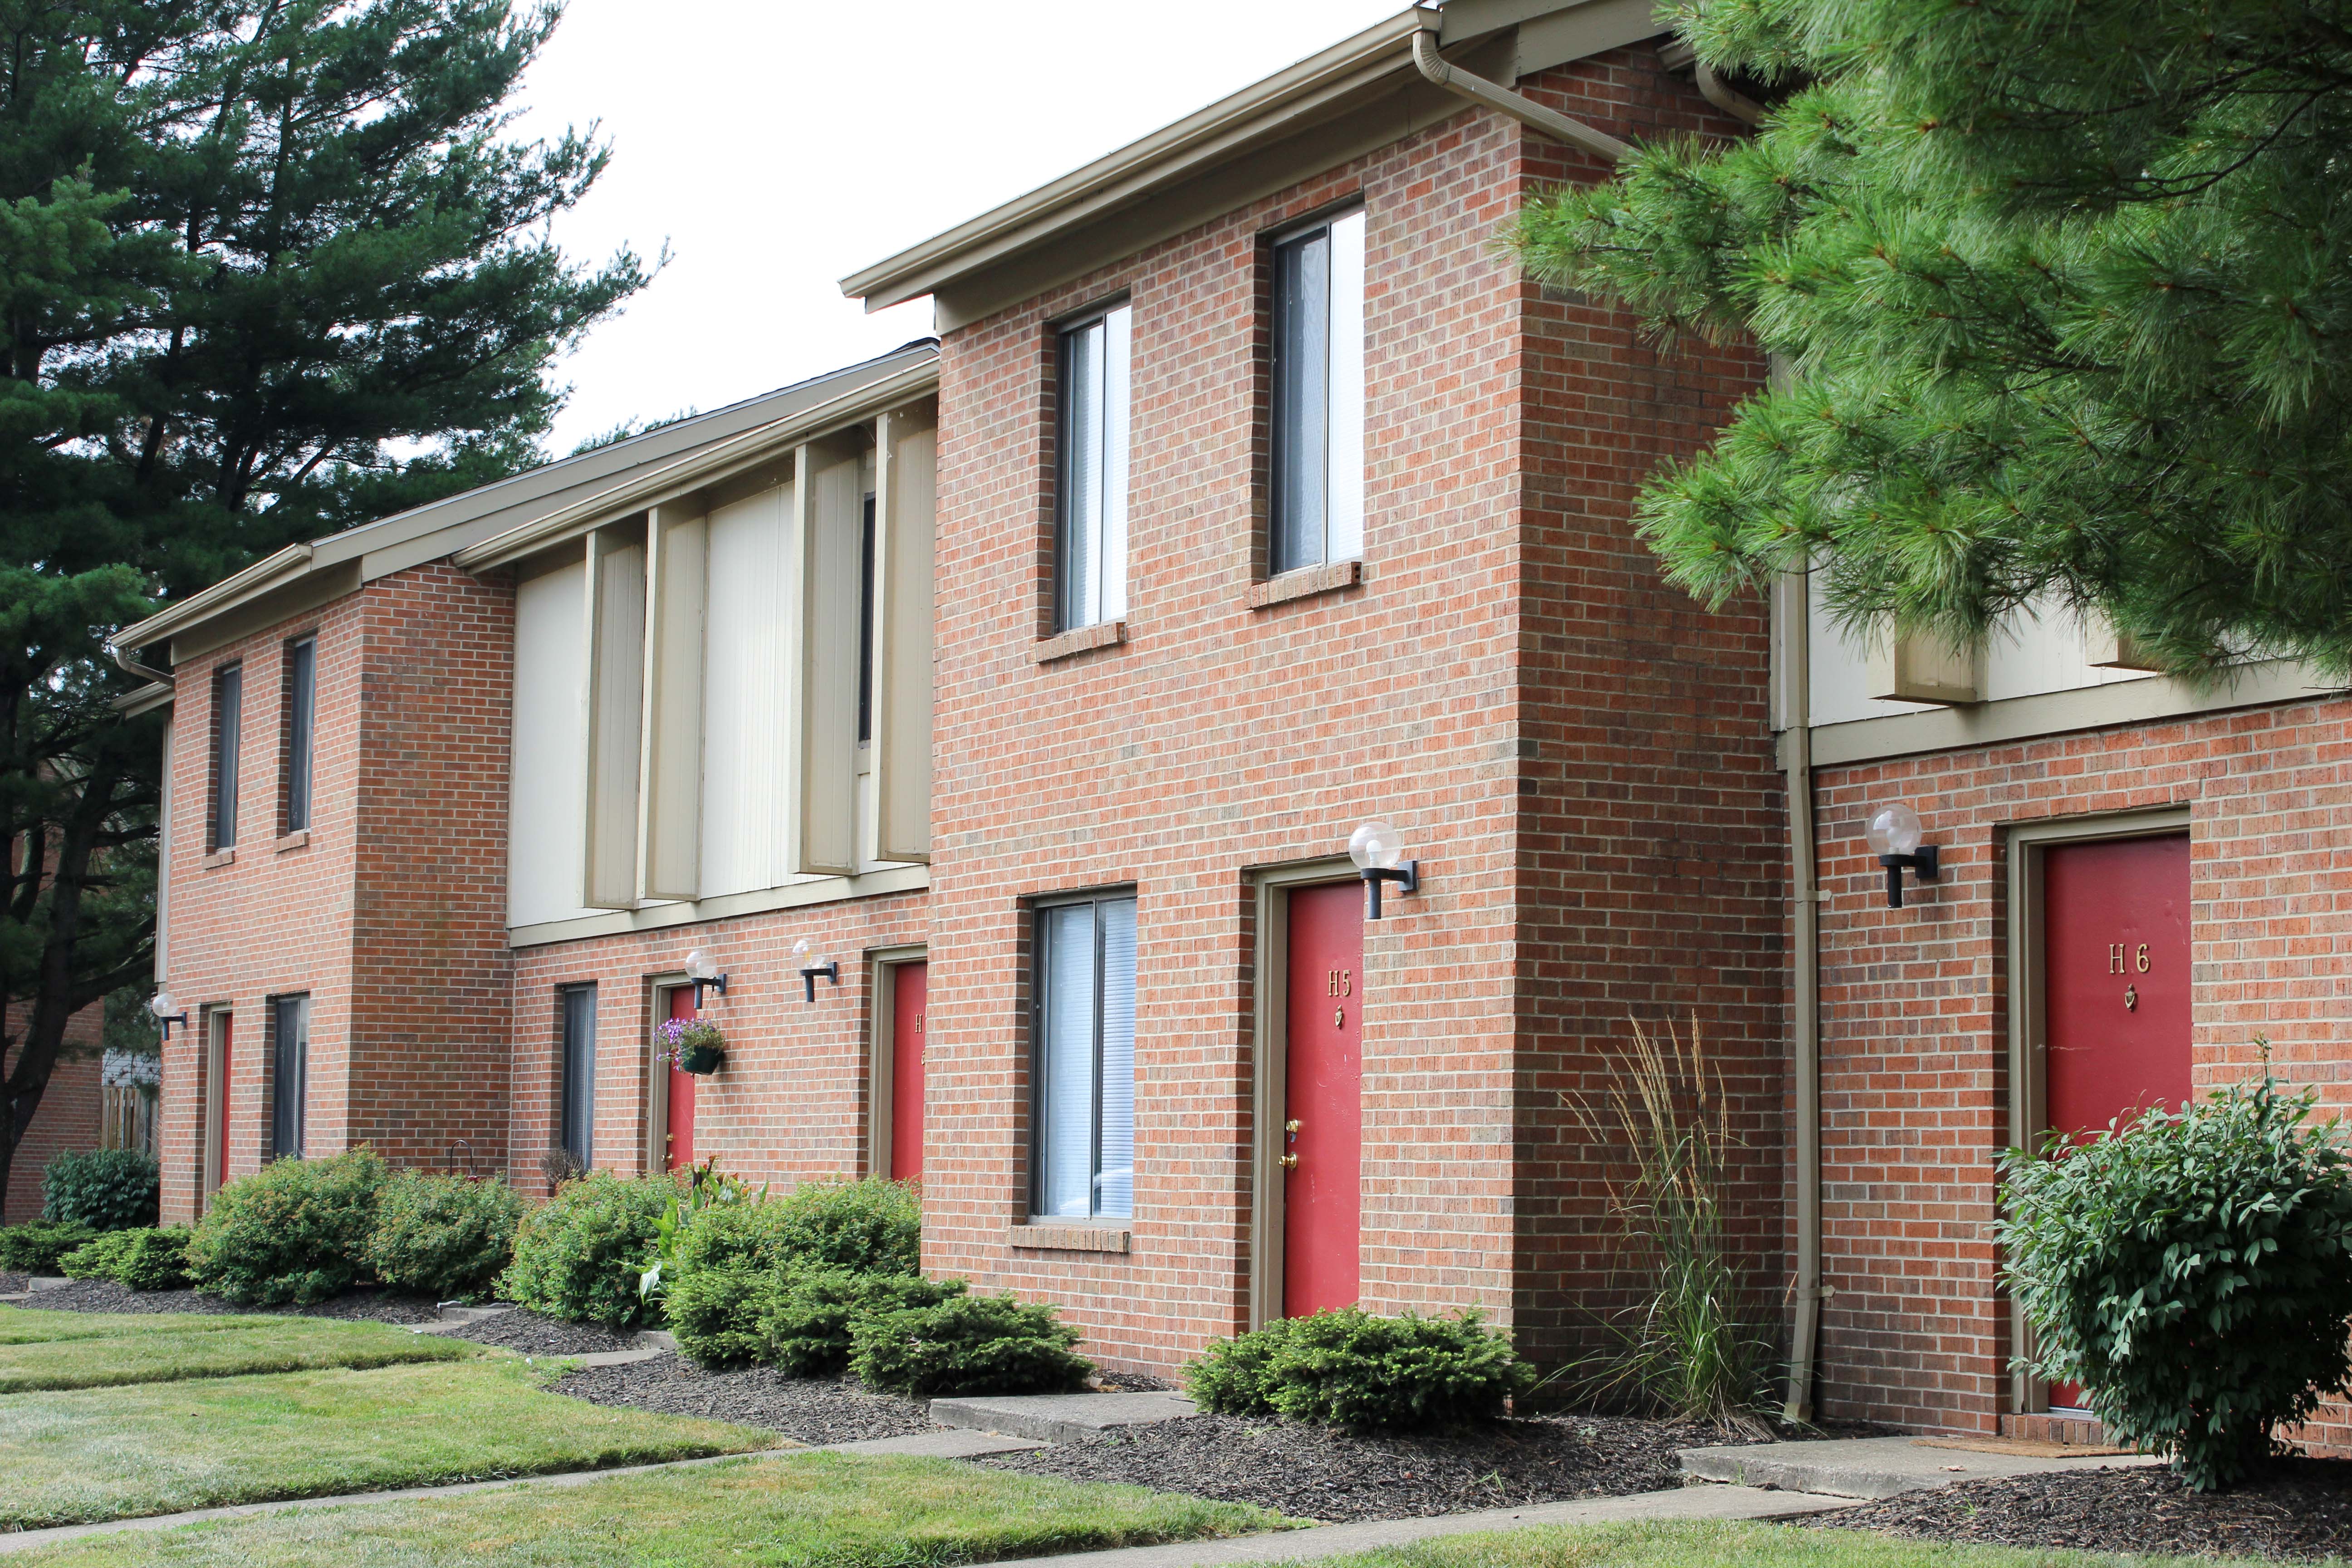 Exterior view of the apartment buildings at North River Place in Chillicothe, Ohio